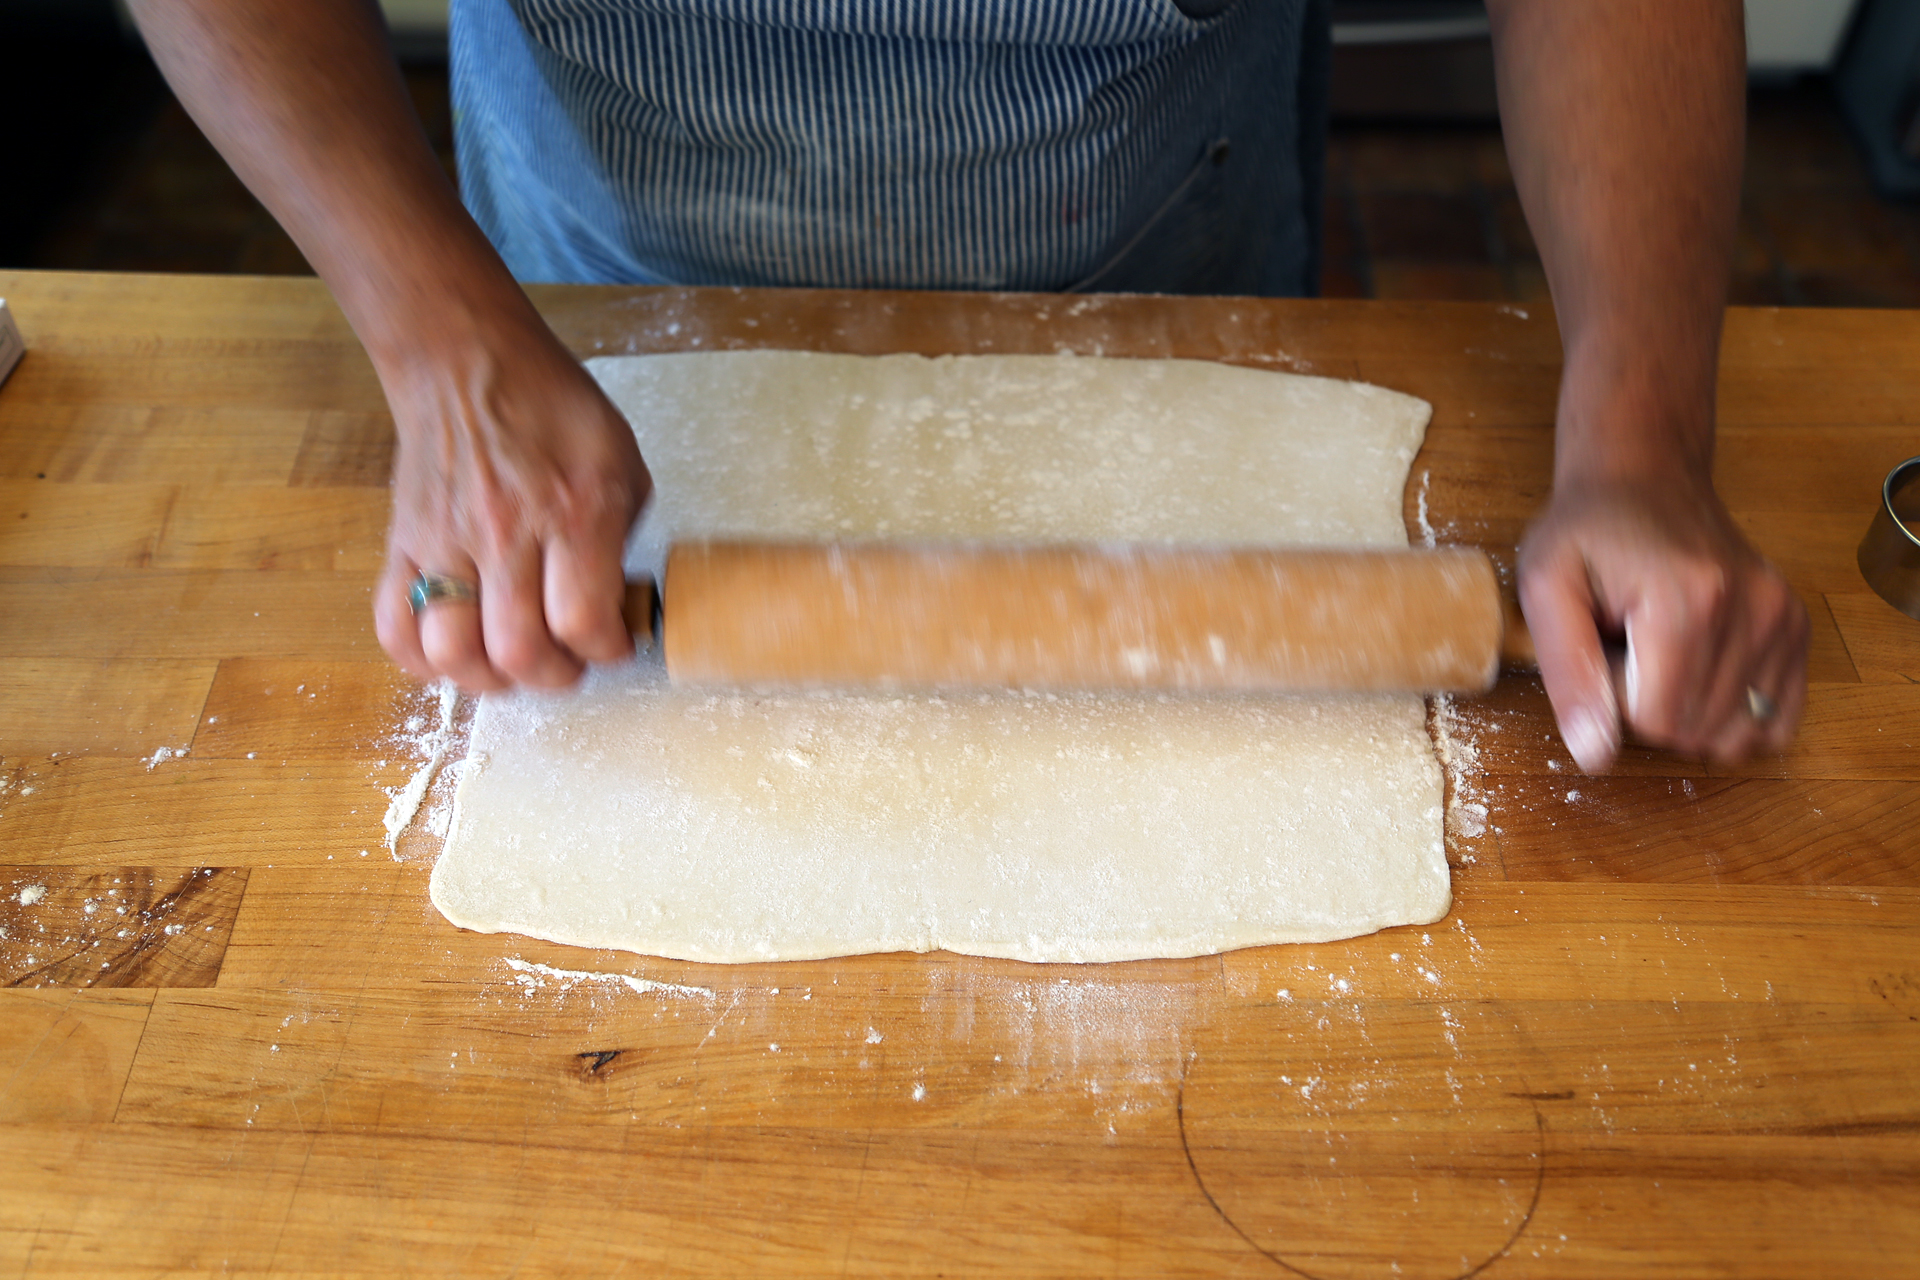 Roll out the pastry to 1/16th inch thick, into a rectangle about 11-inches long and 5 to 6 inches wide.